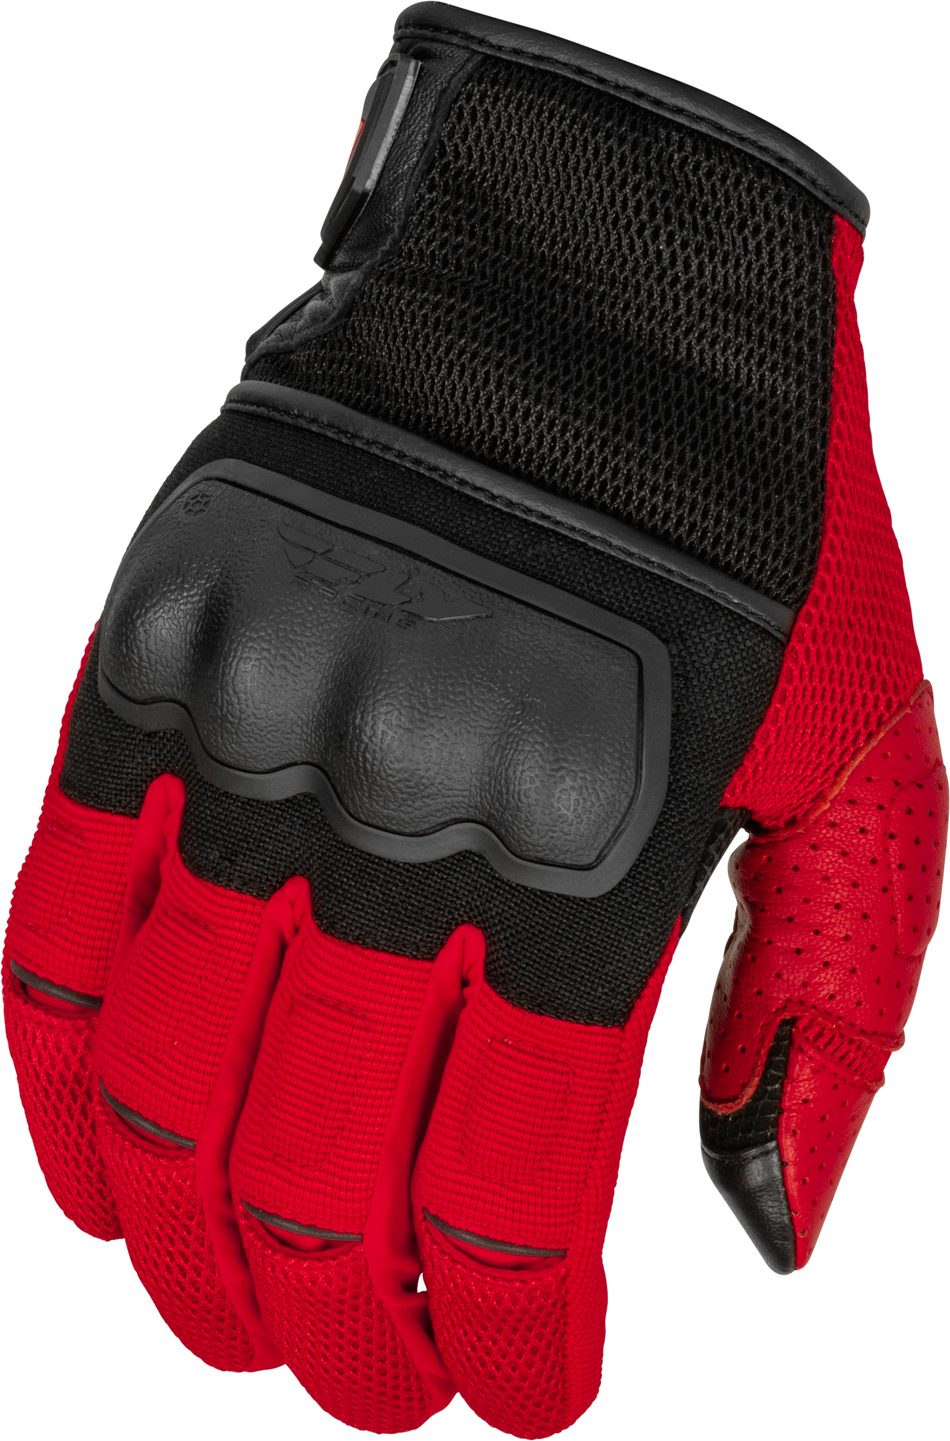 FLY RACING Coolpro Force Gloves Black/Red Xl 476-4129X